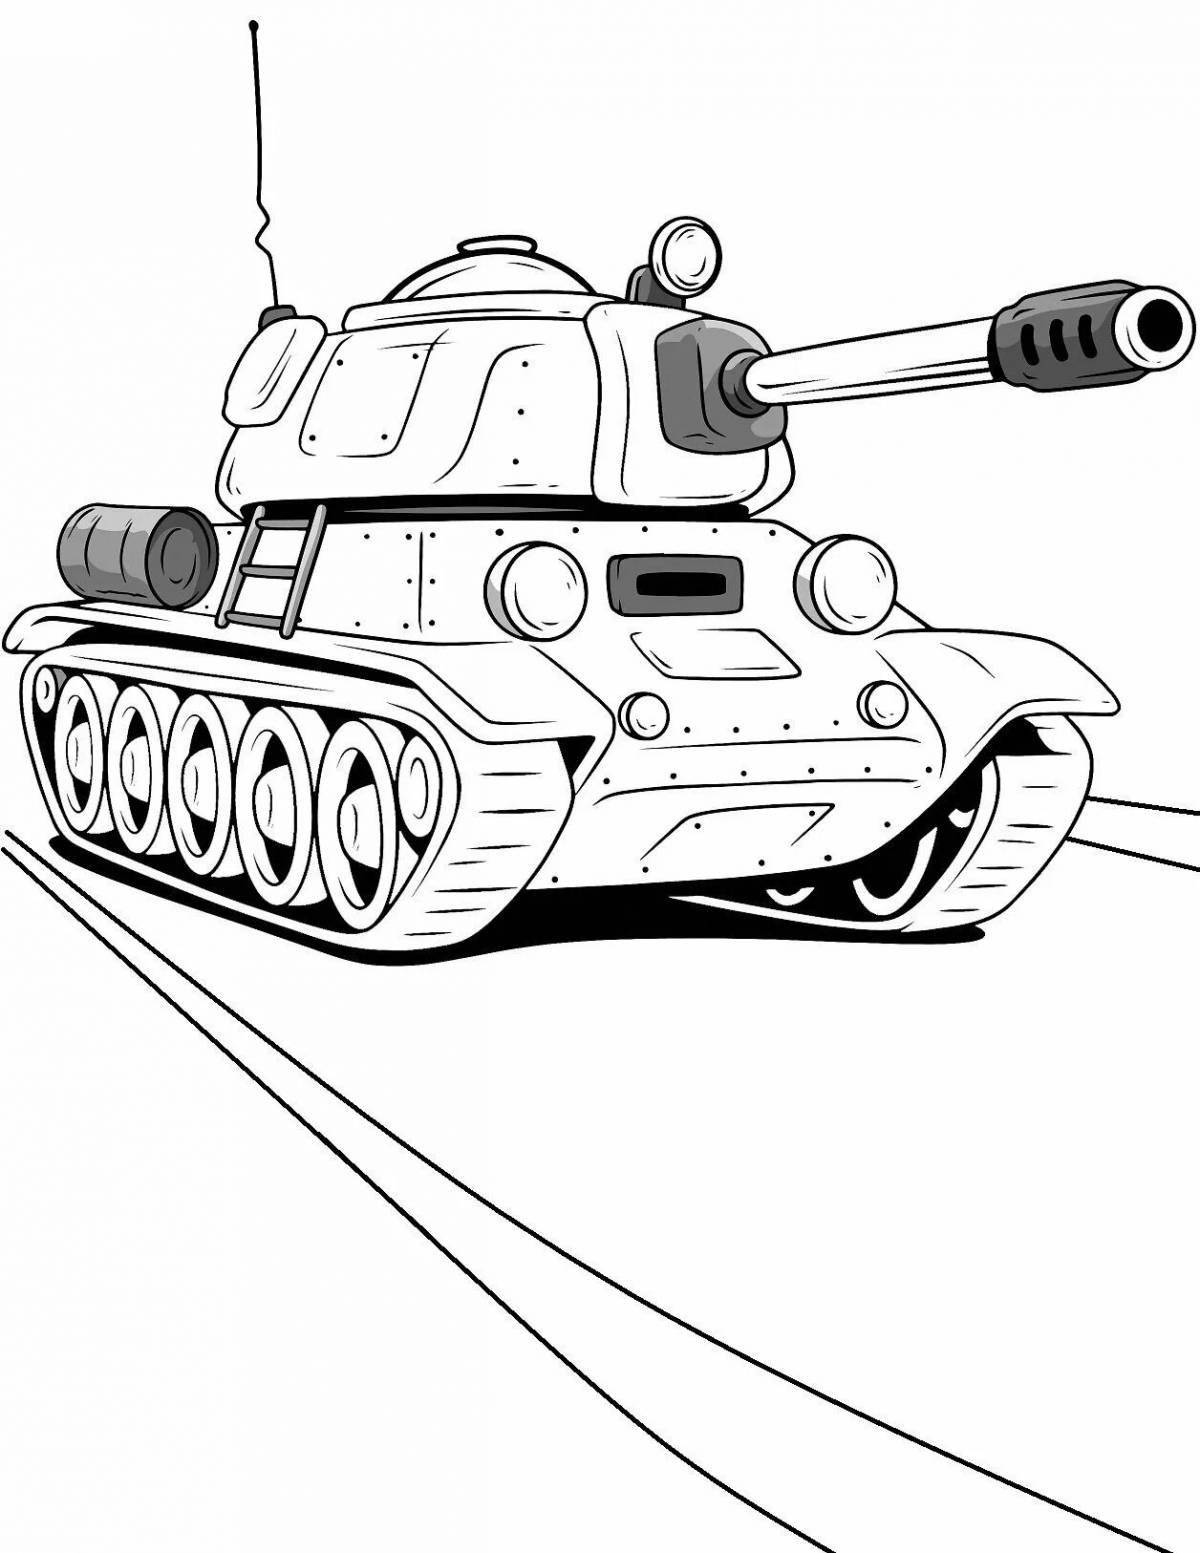 Bright coloring t-34 for the little ones